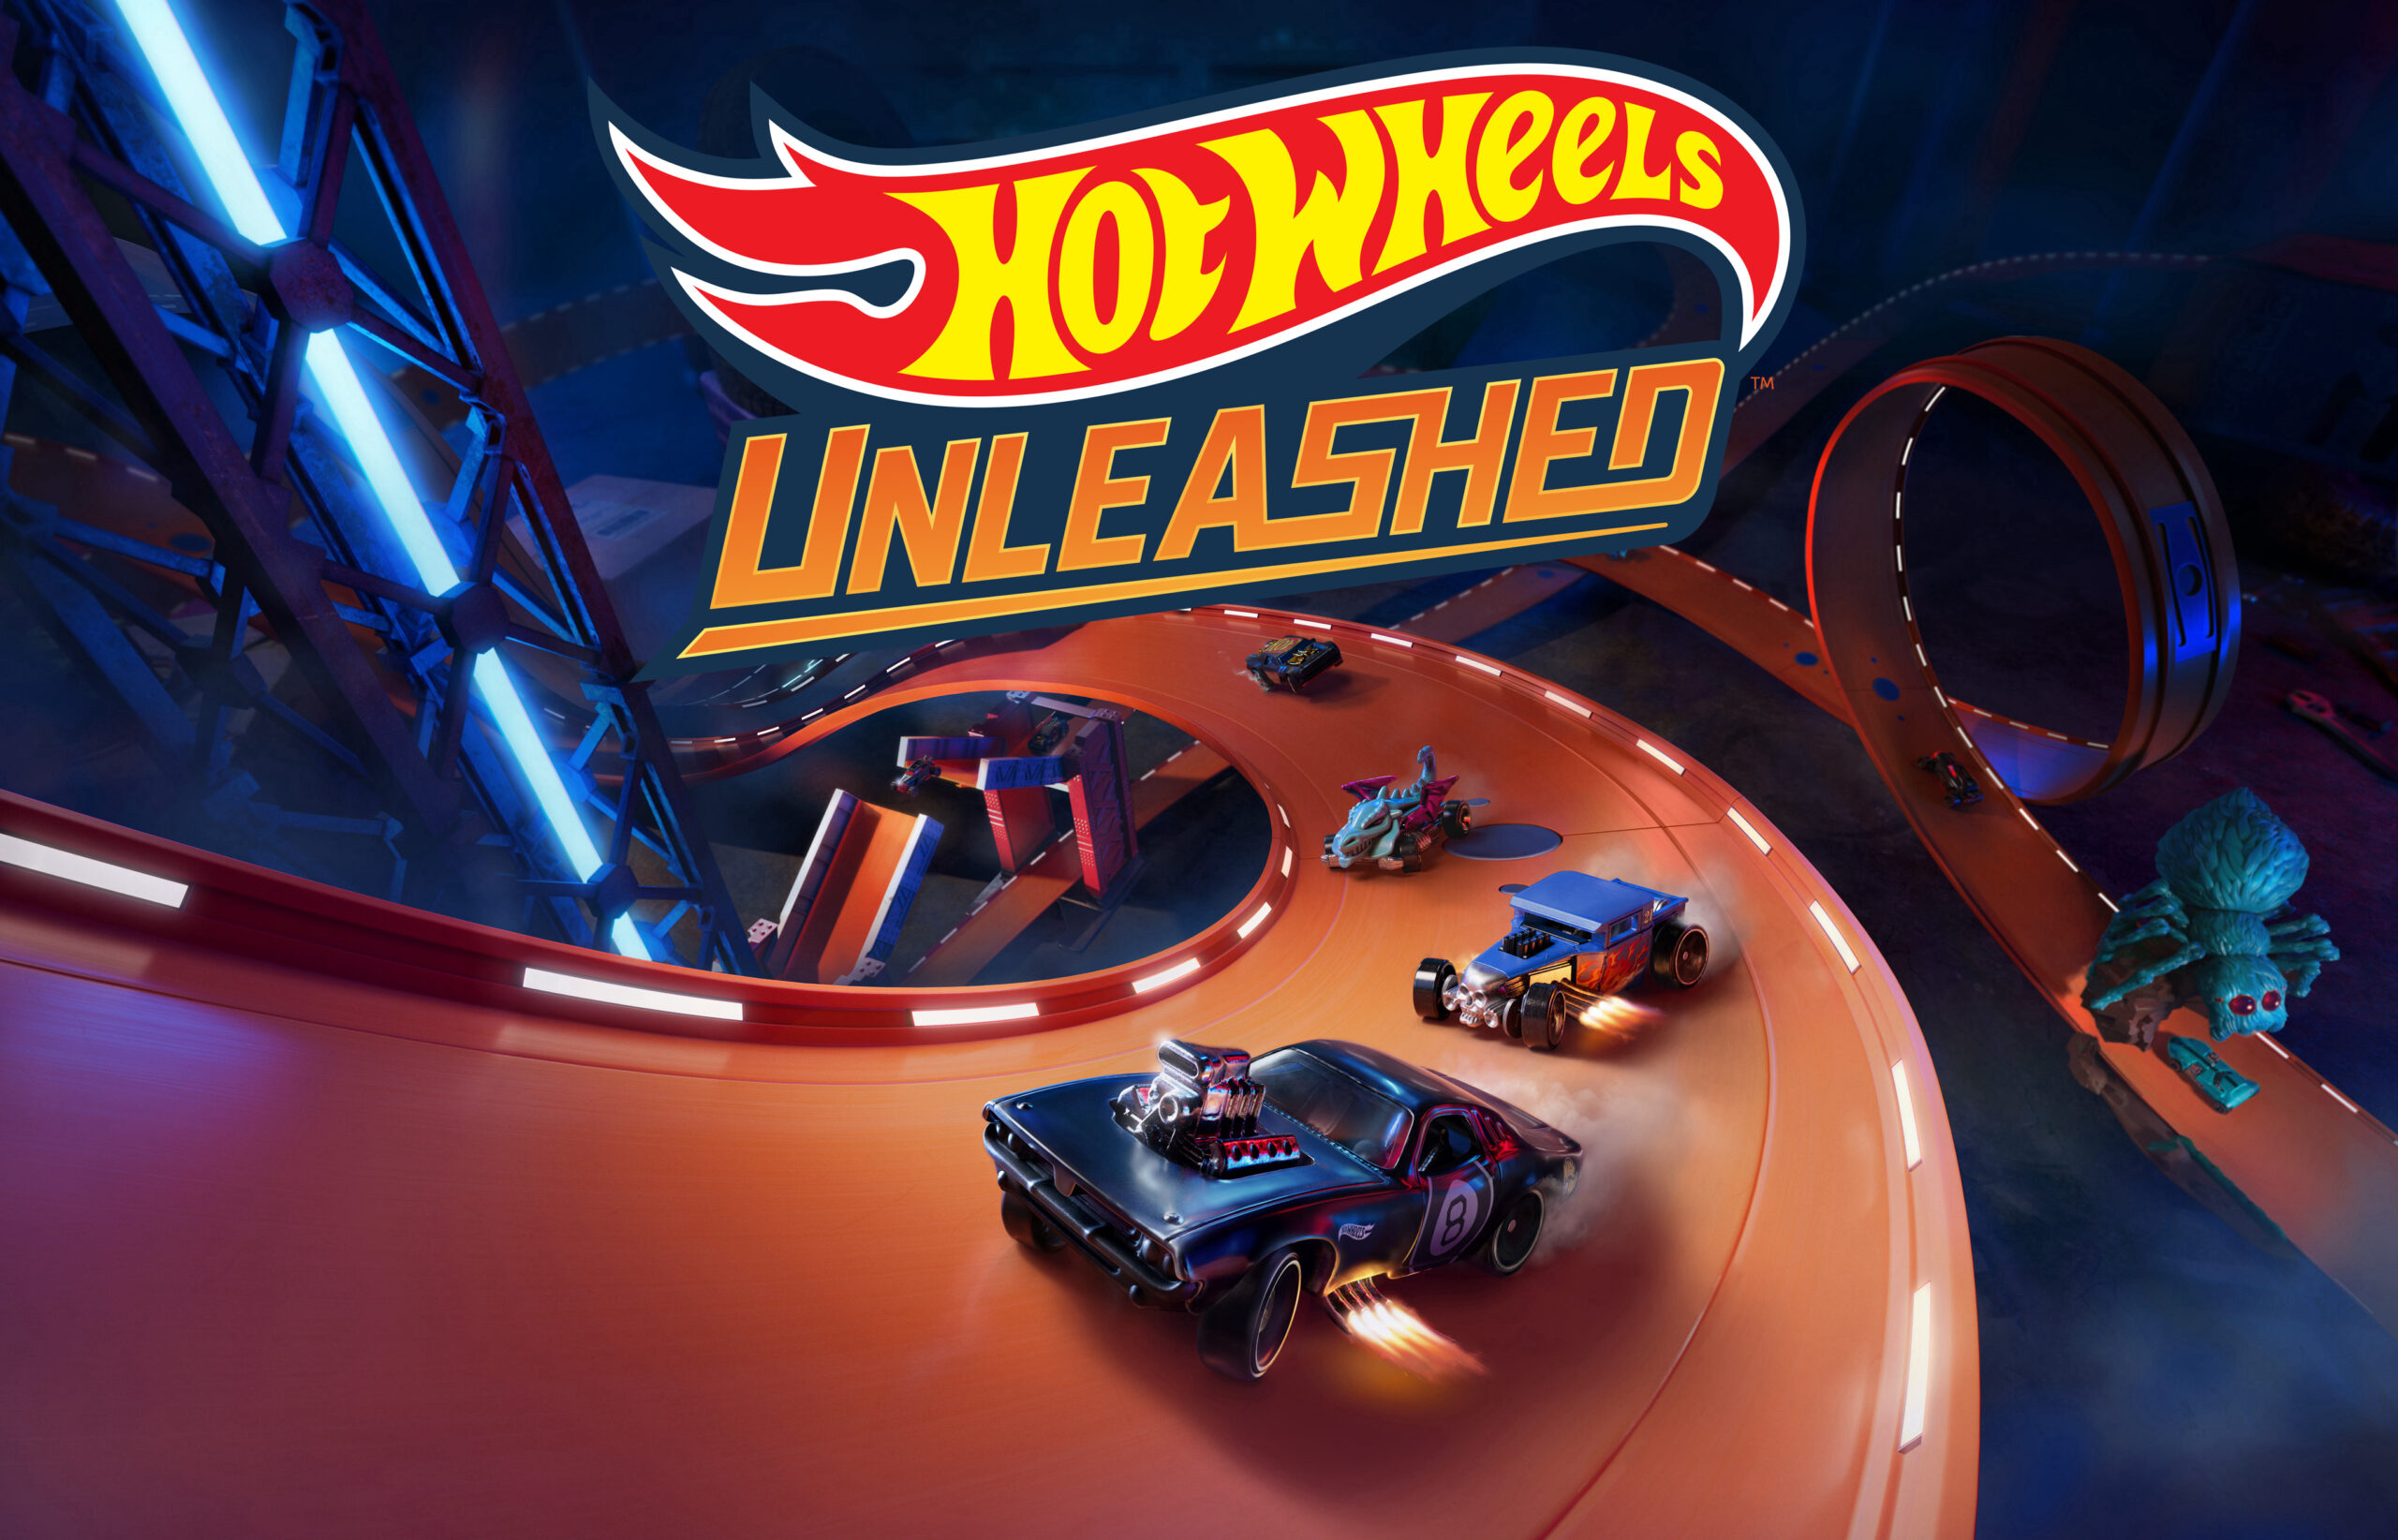 Hot Wheels Unleashed - Official Skyscraper Unveil Trailer - YouTube